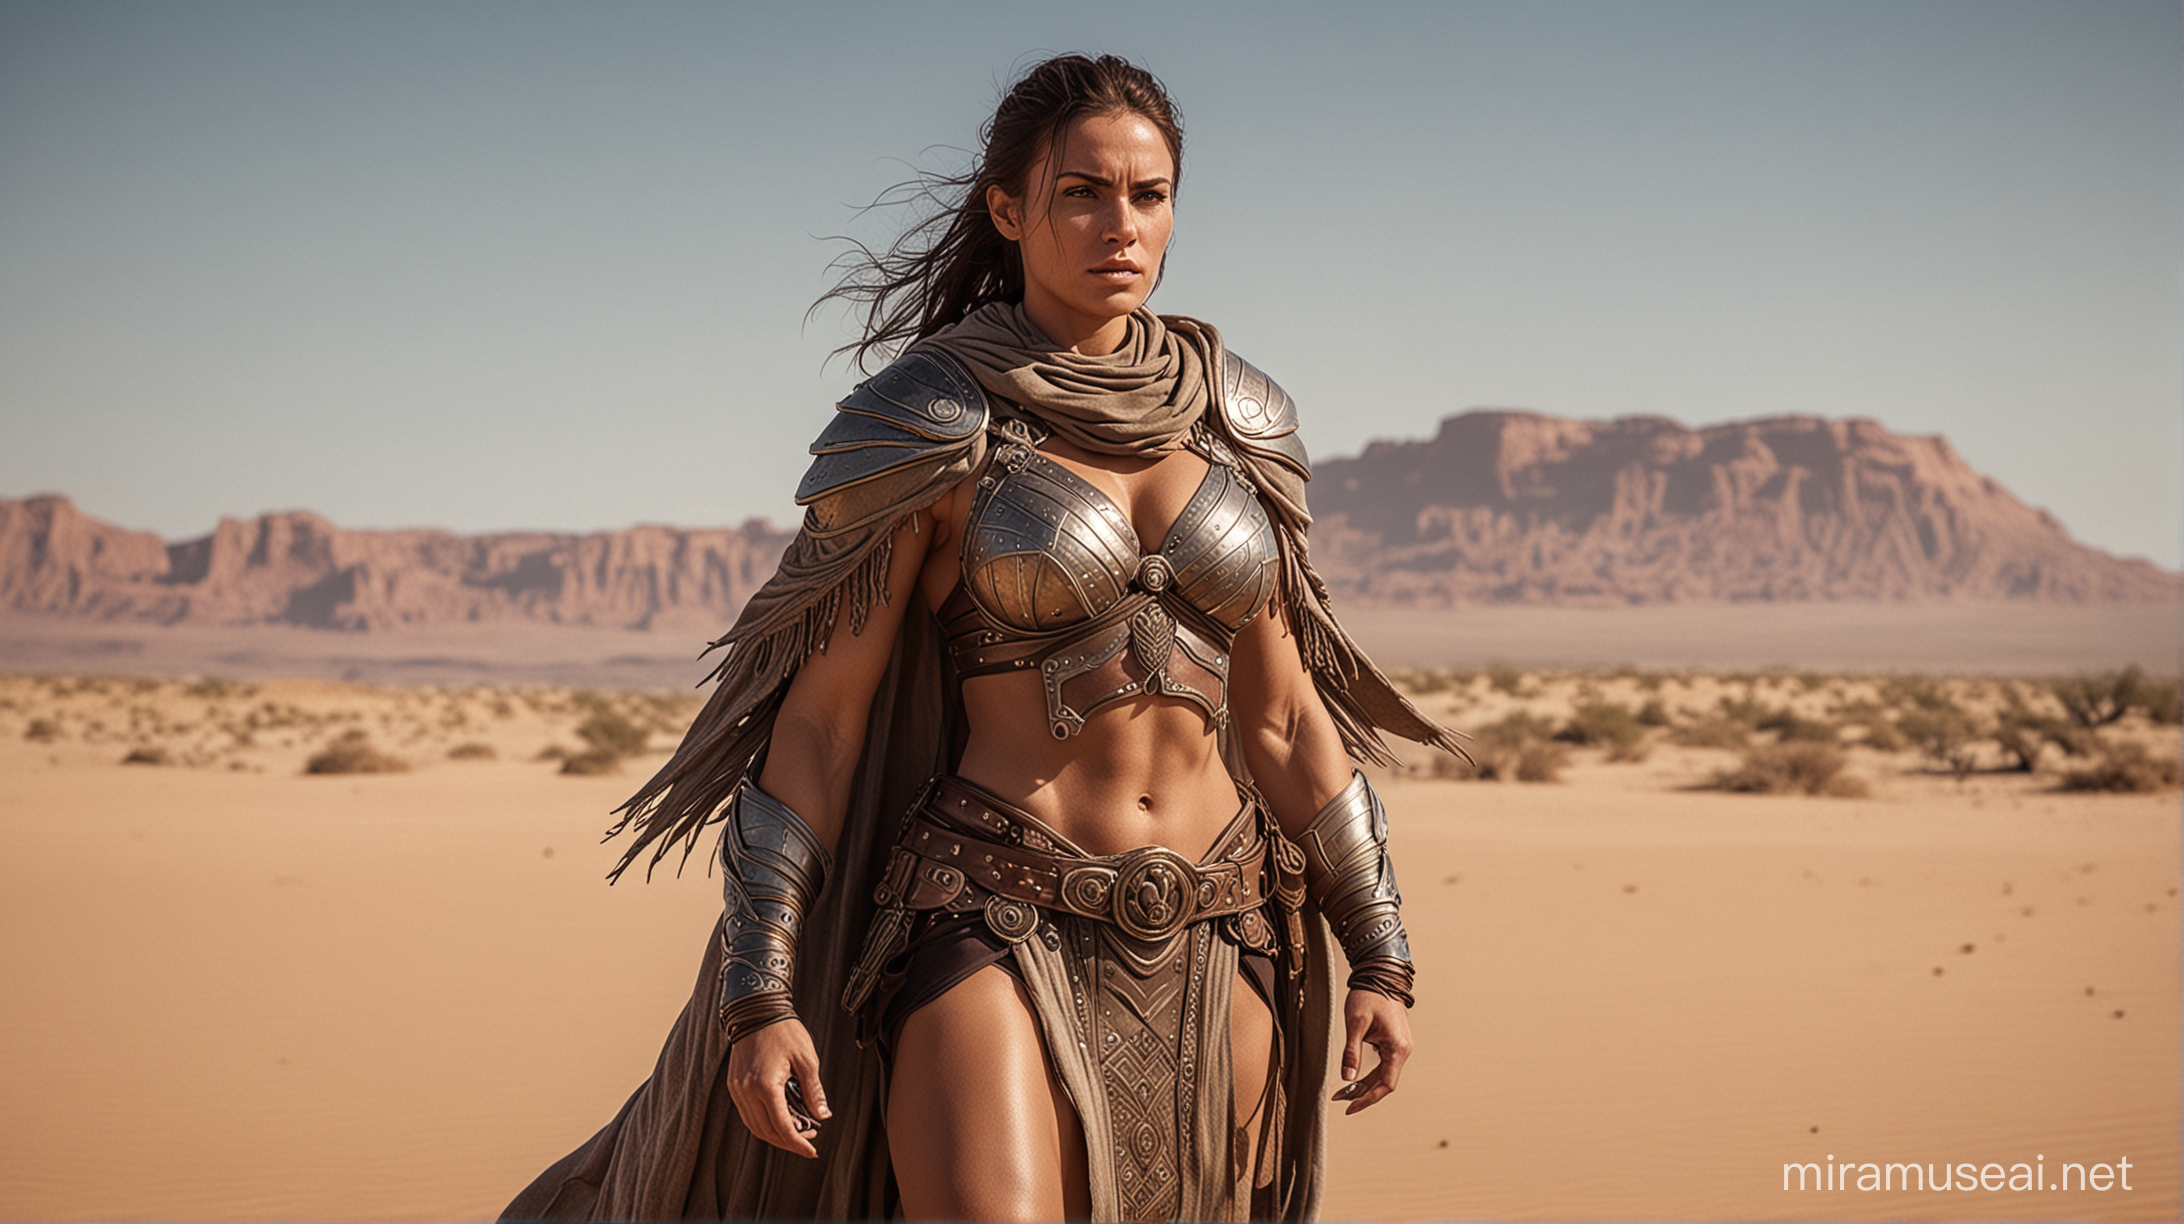 Extremely muscular woman; colossal; nomad armor; desert robe; 